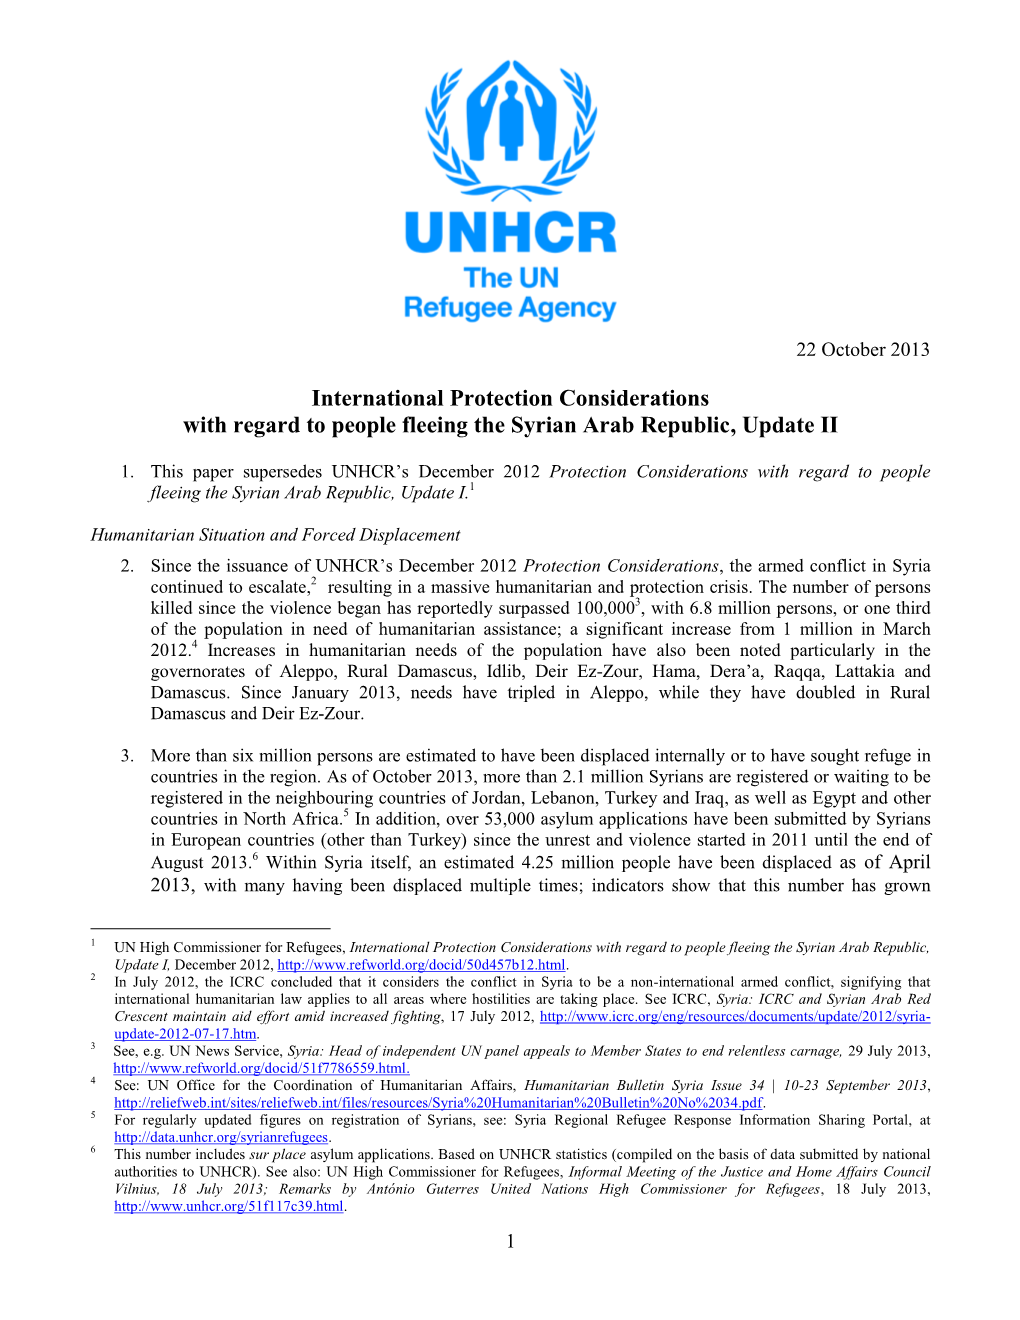 International Protection Considerations with Regard to People Fleeing the Syrian Arab Republic, Update II